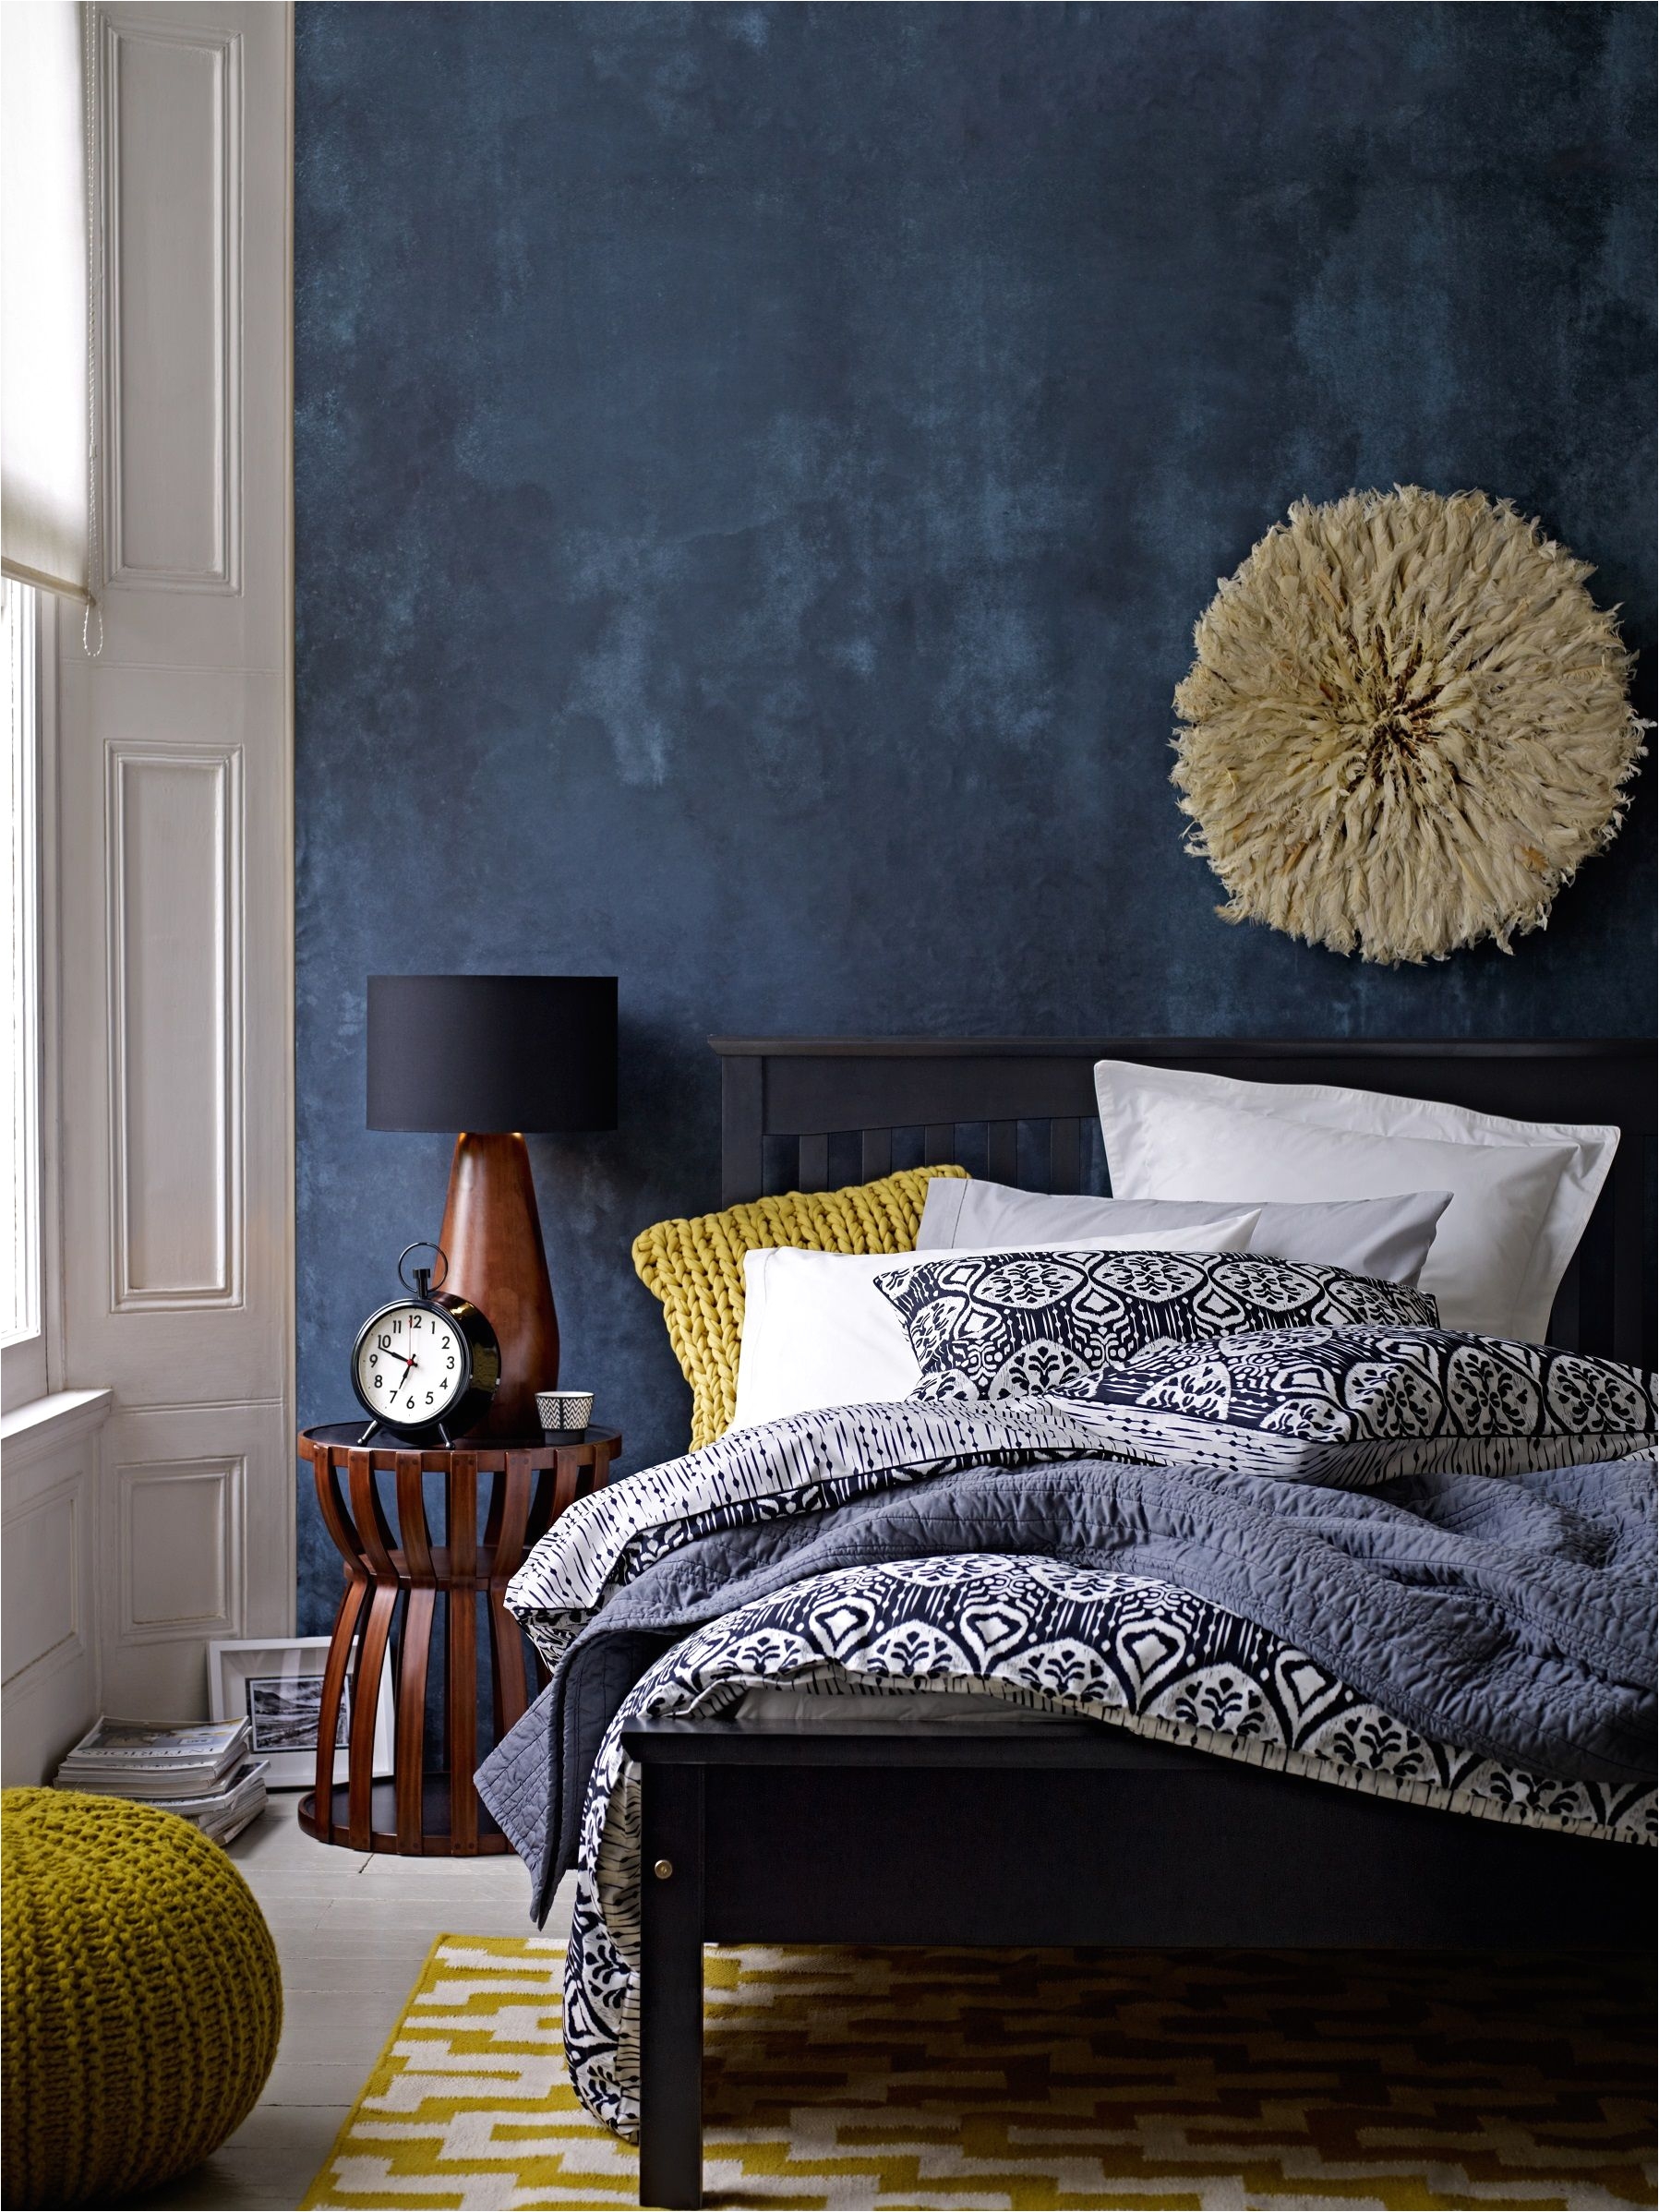 deep blue accent wall in modern eclectic bedroom gorgeous use of color with wall and bedding